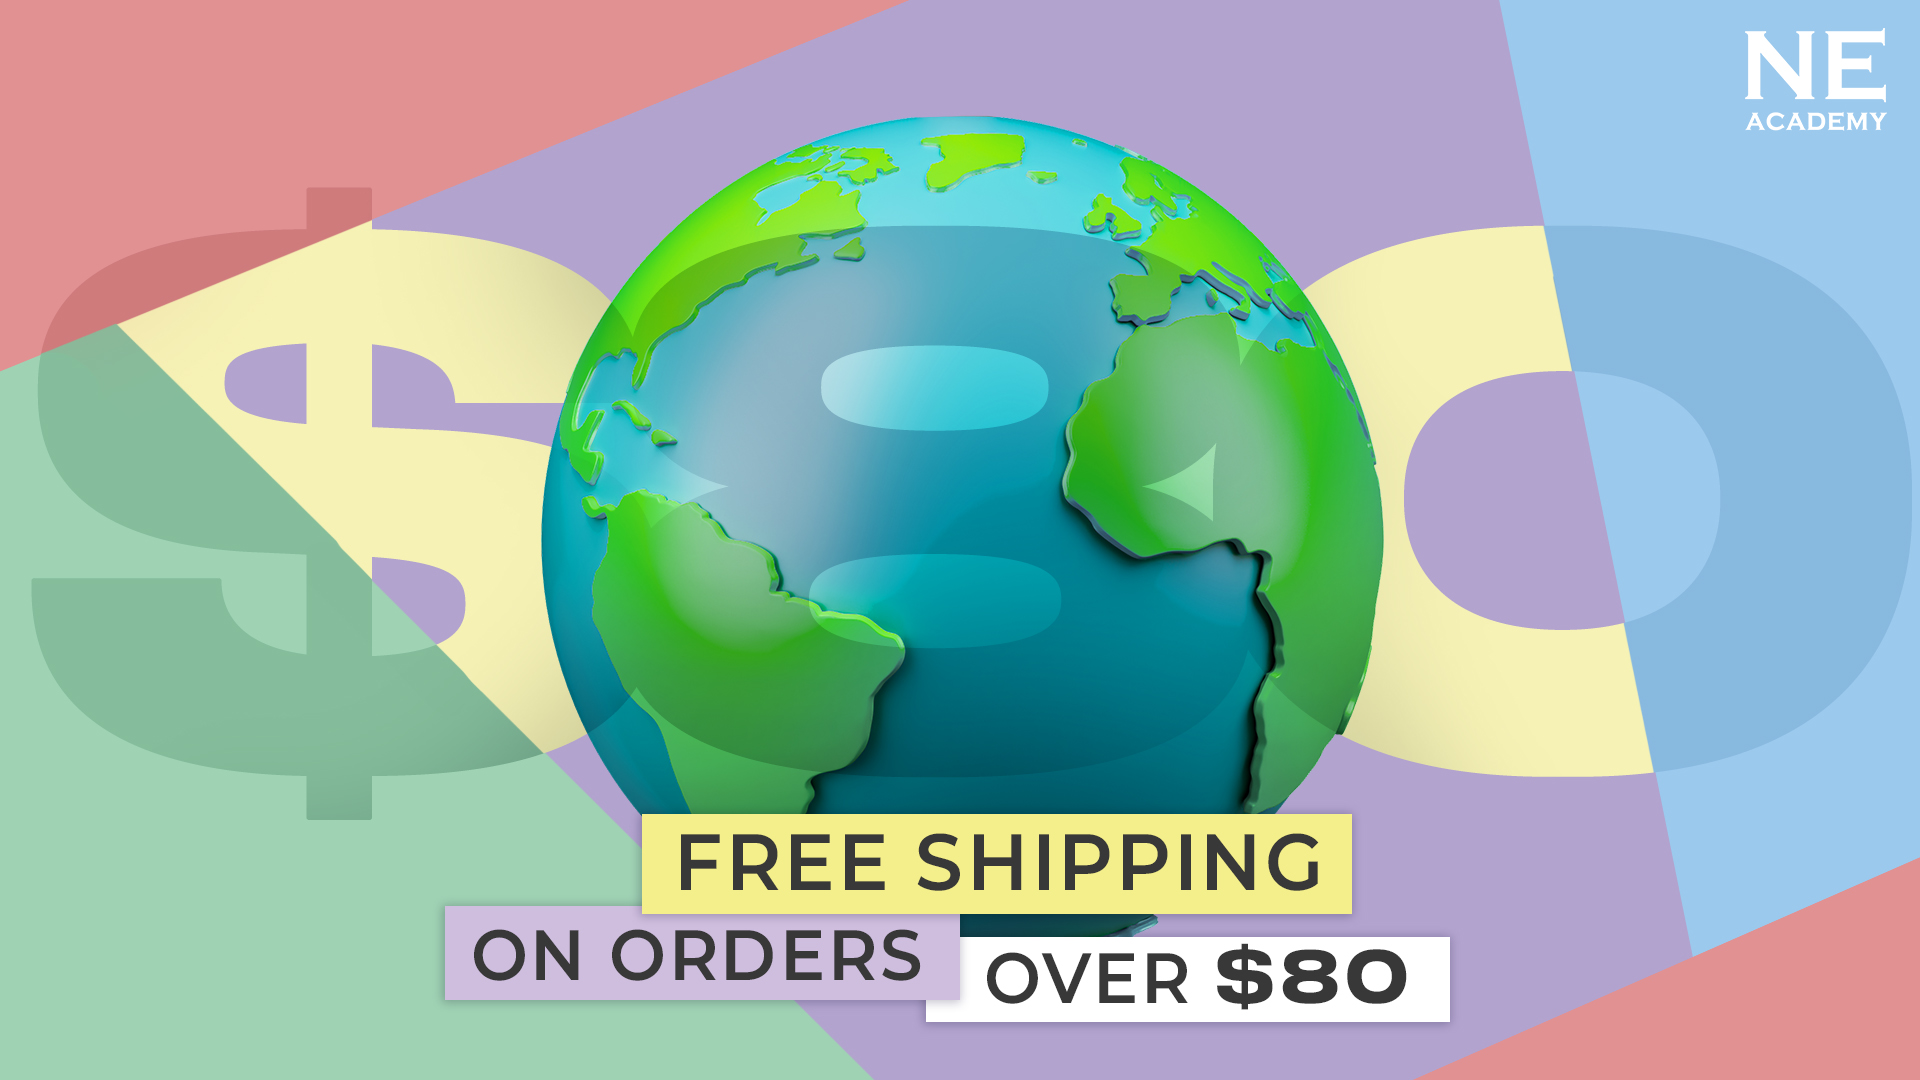 Free shipping on orders over $80